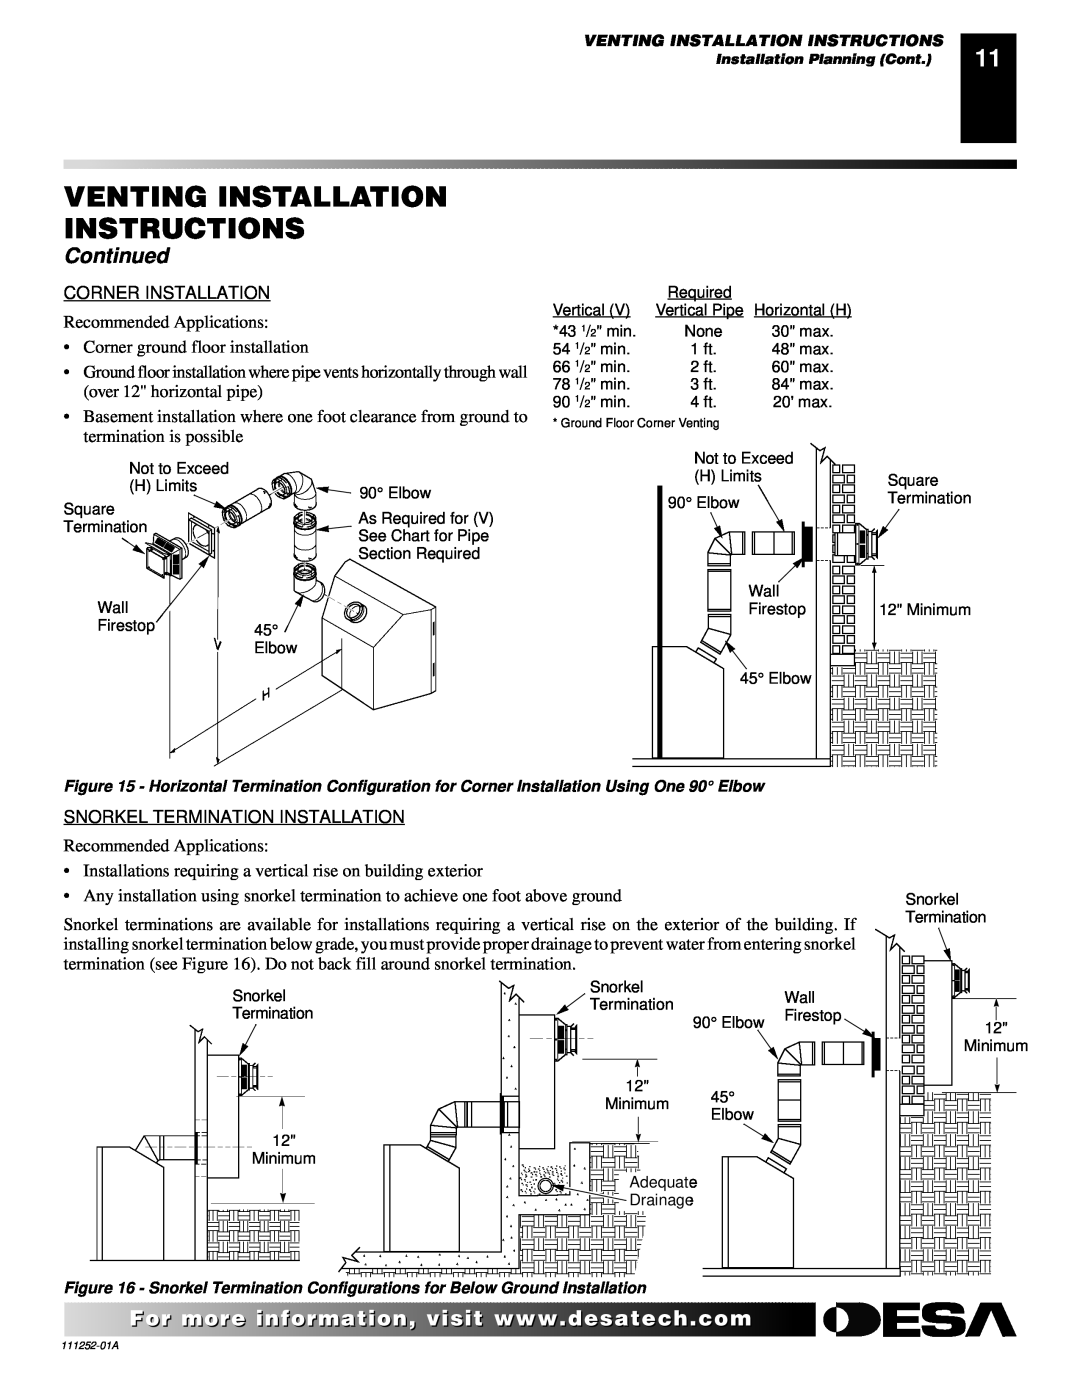 Desa CHDV36NRA installation manual Venting Installation Instructions, Continued, Recommended Applications 